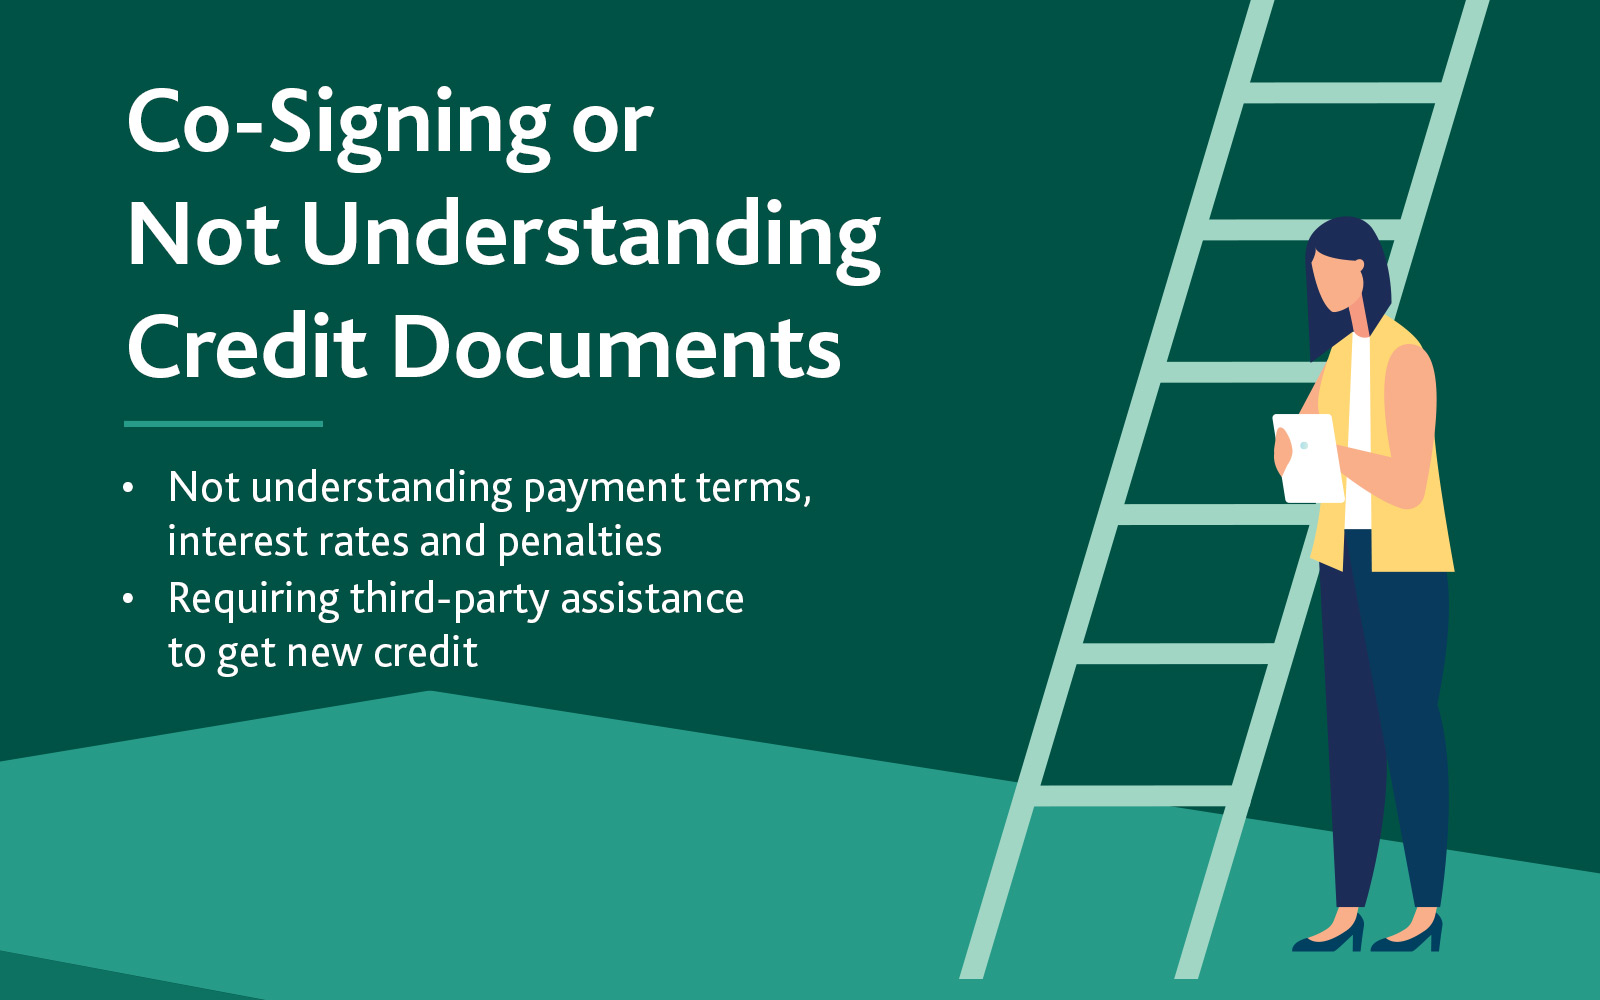 Co-Signing or not understanding credit documents with 2 bullet points underneath: not understanding payment terms, interest rates, and penalties. Requiring third-party assistance to get new credit. With business woman illustration in the background